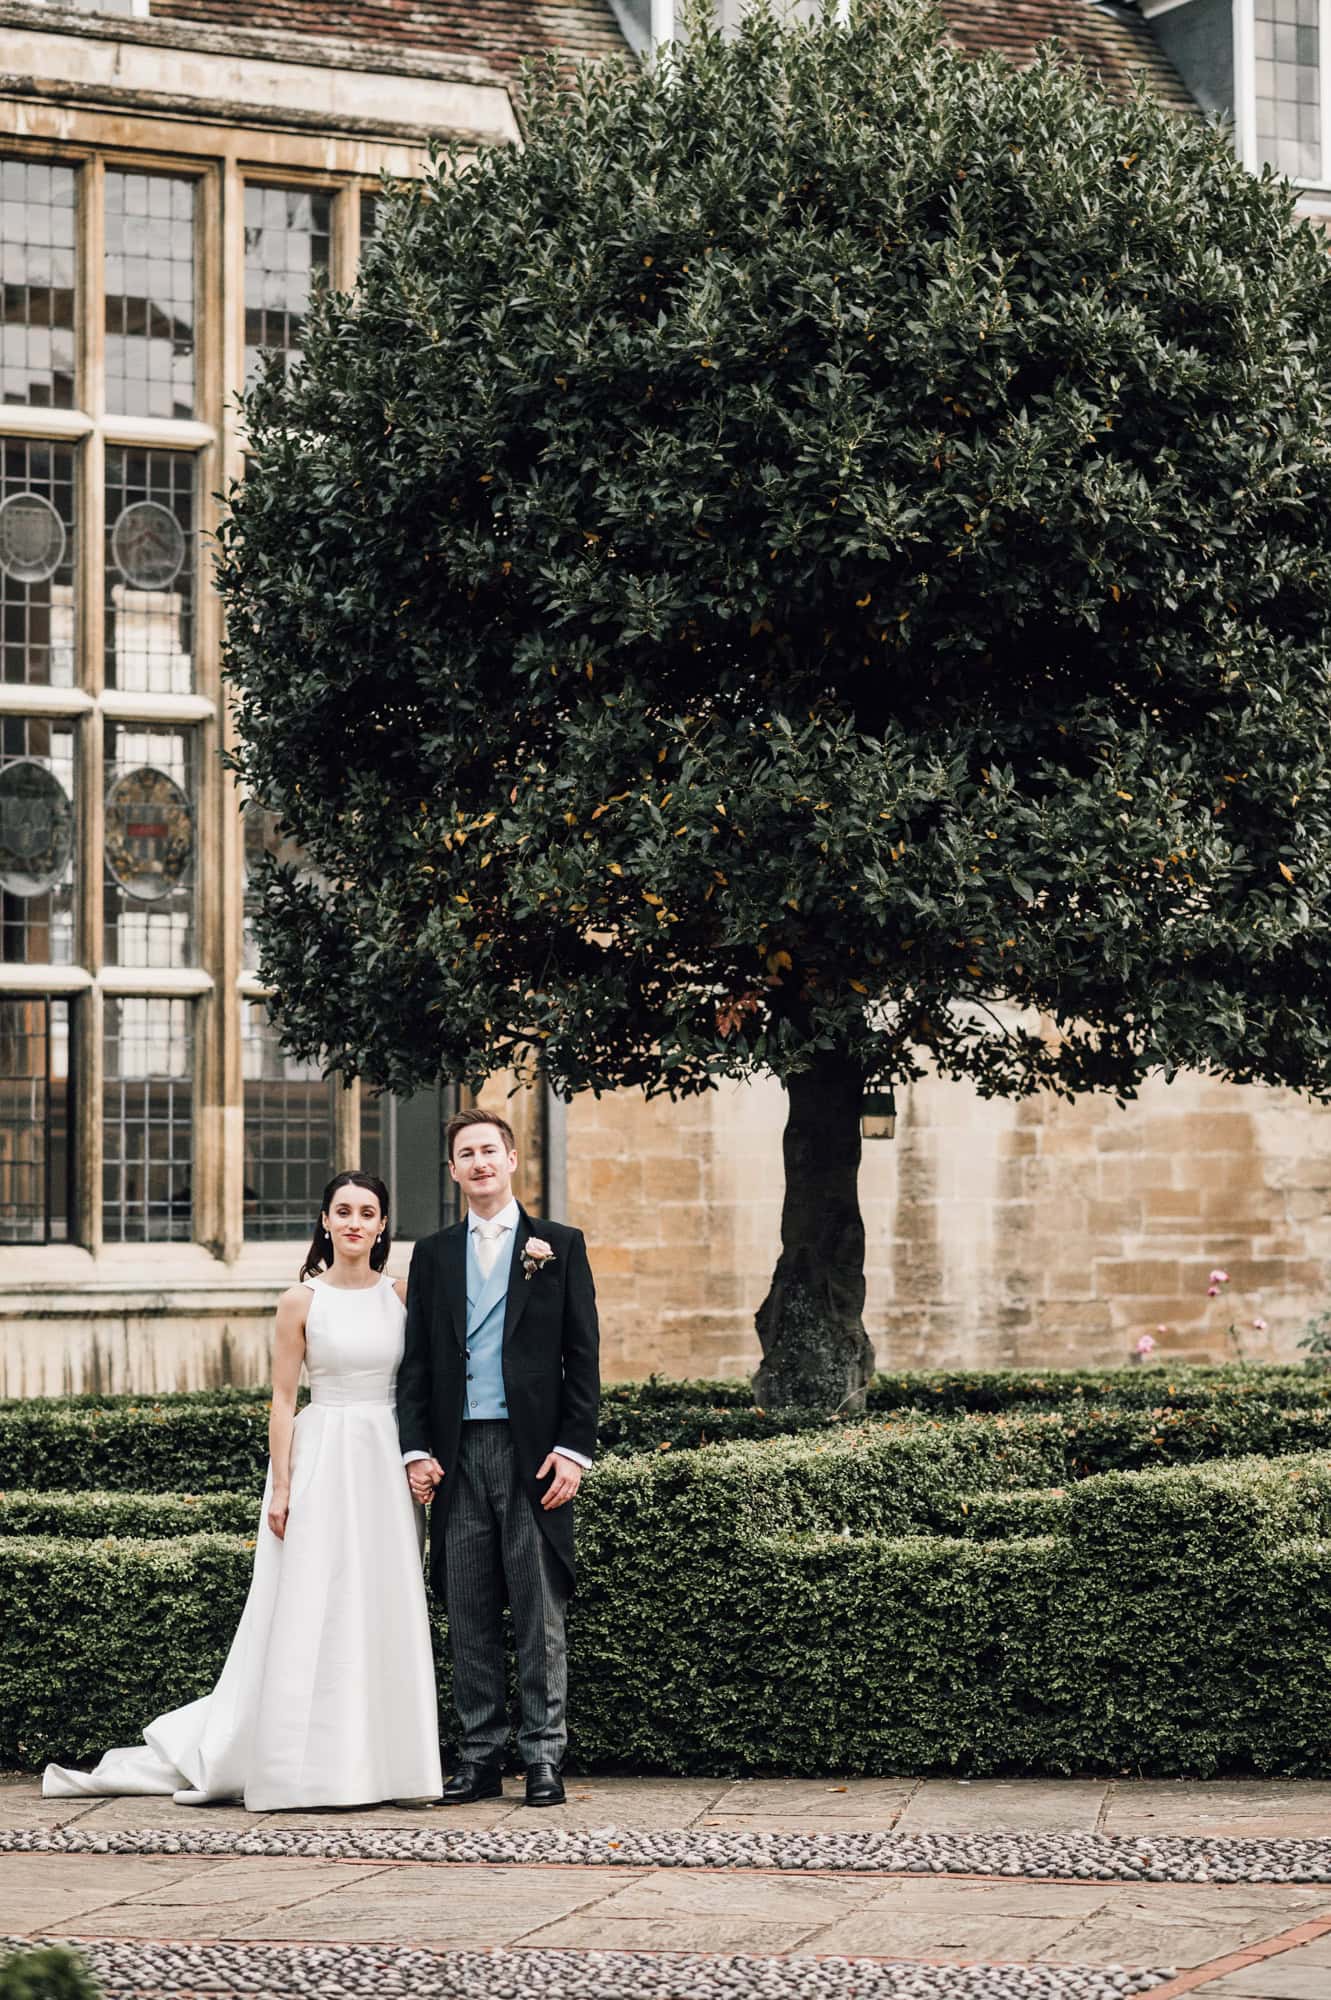 Bride and Groom in the grounds of Emmanuel College, Cambridge